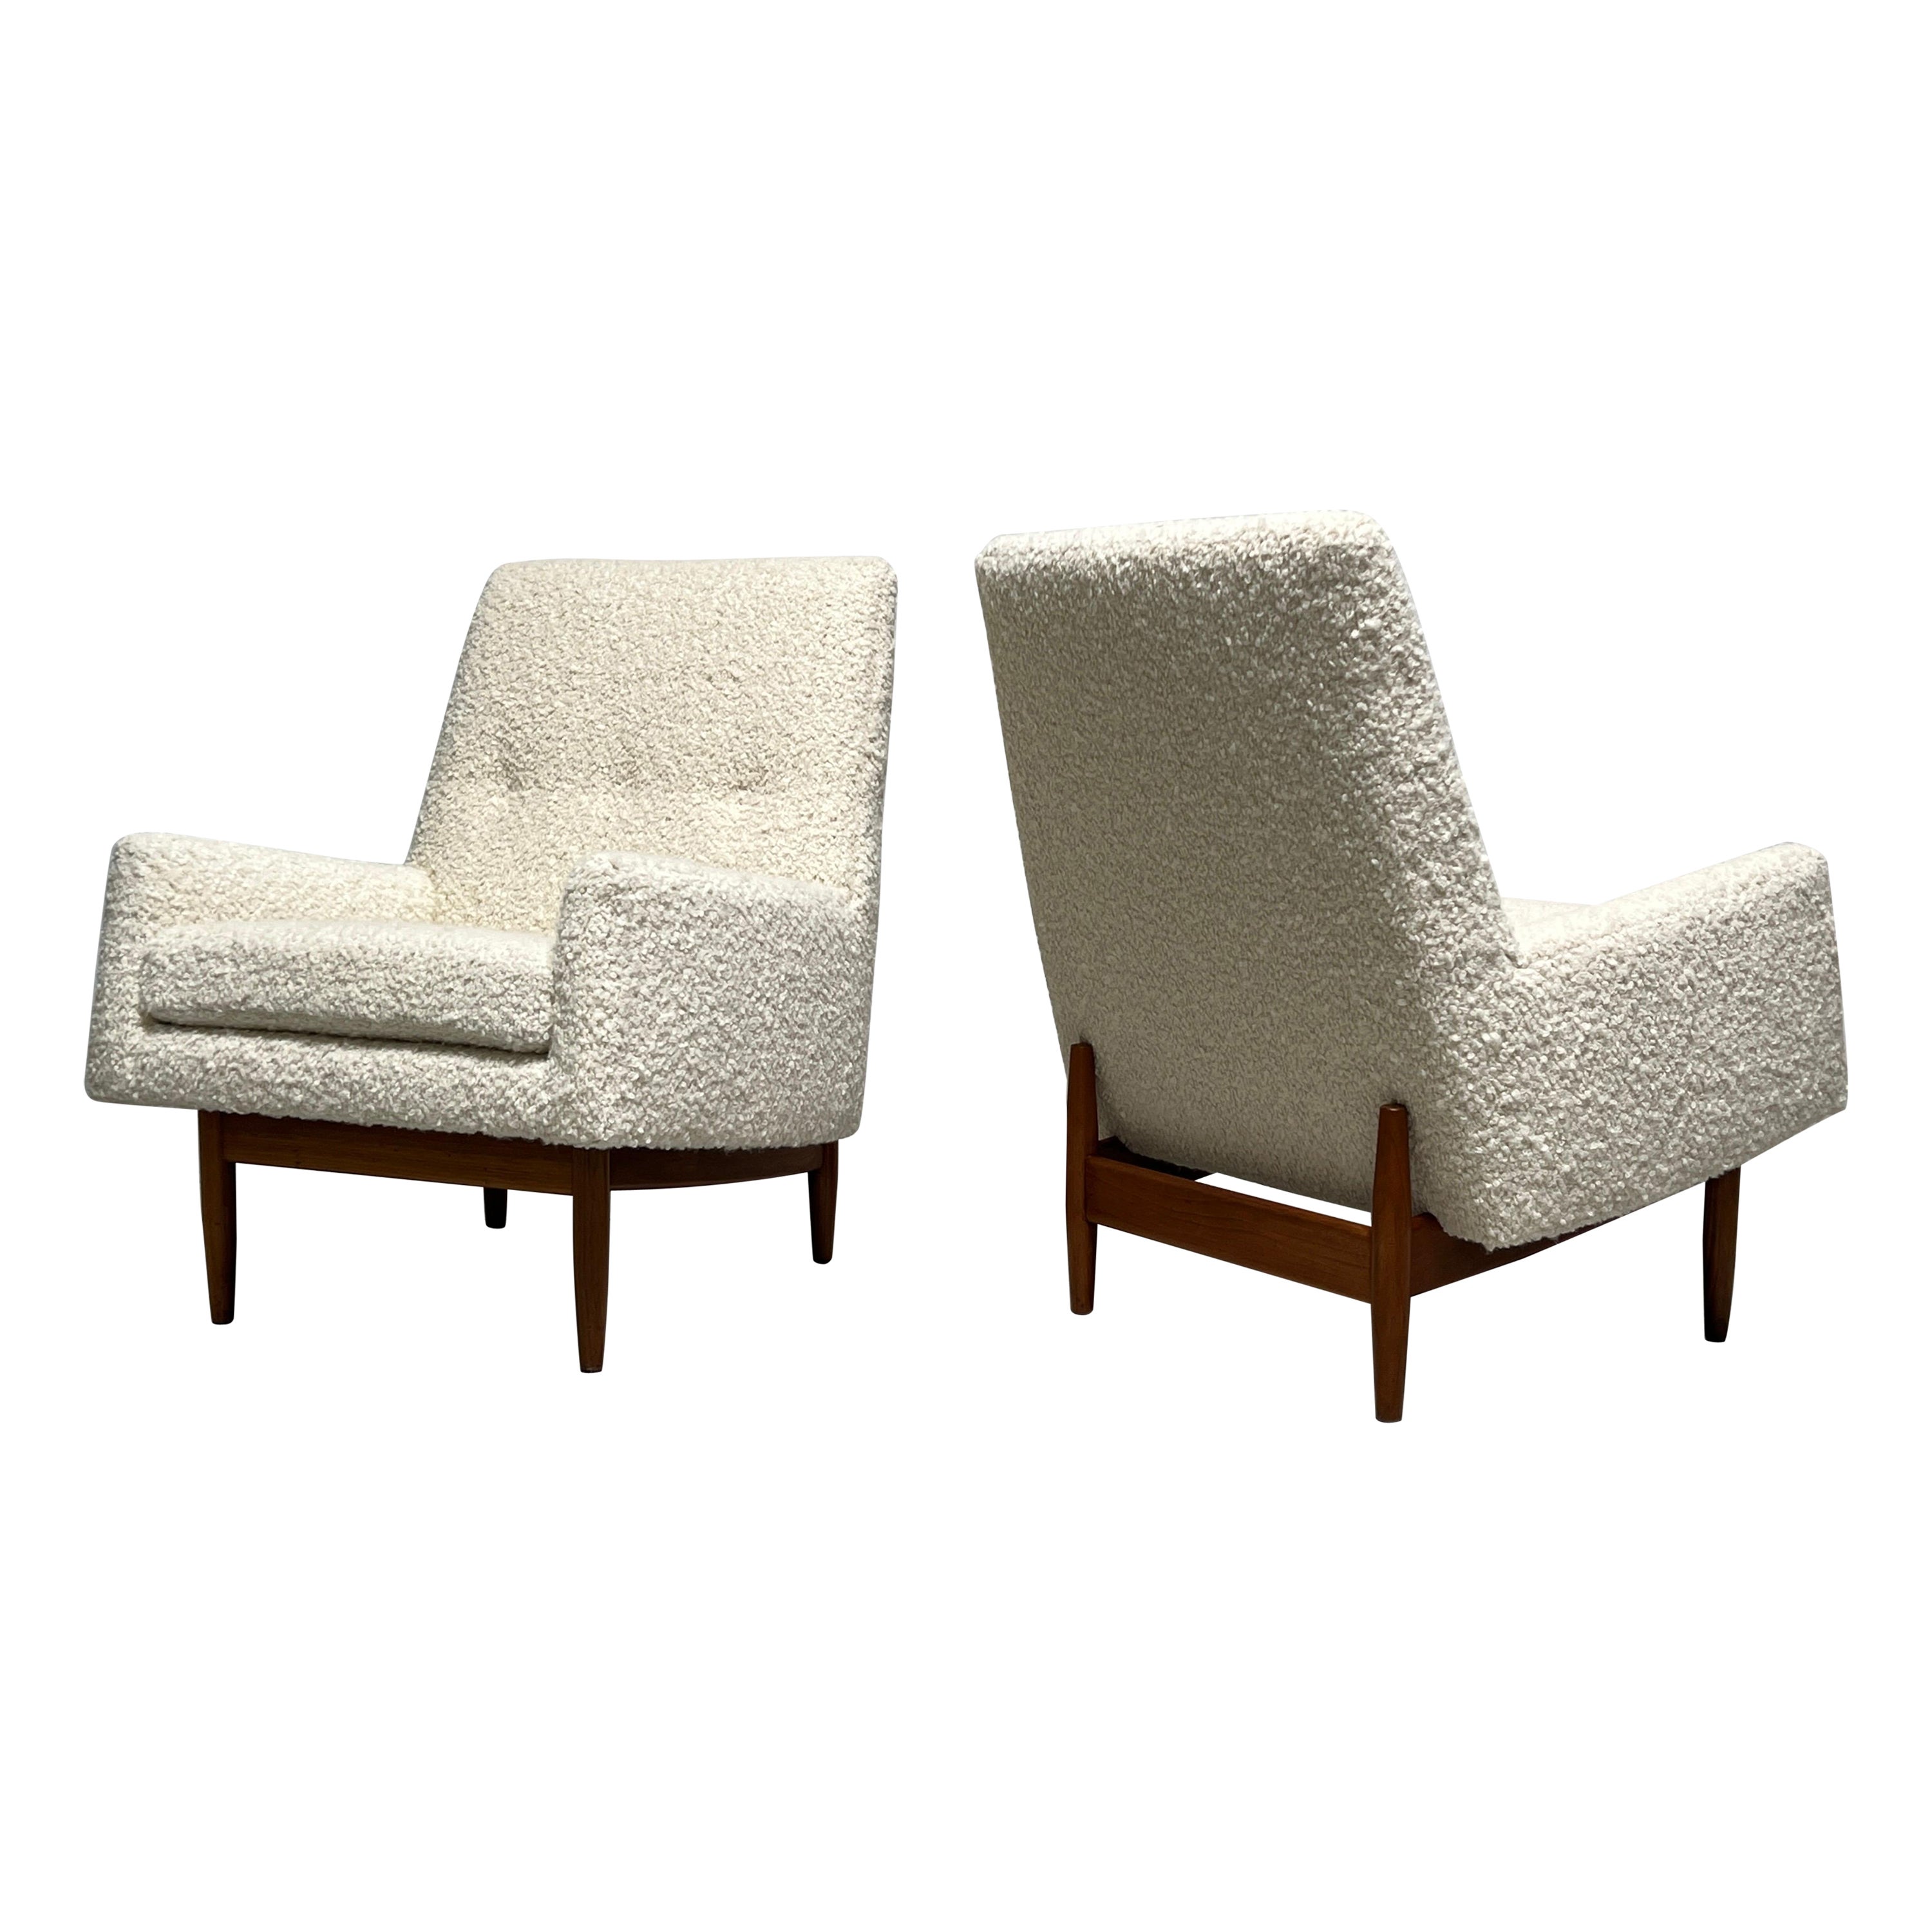 Pair of Lounge Chairs by Jens Risom 